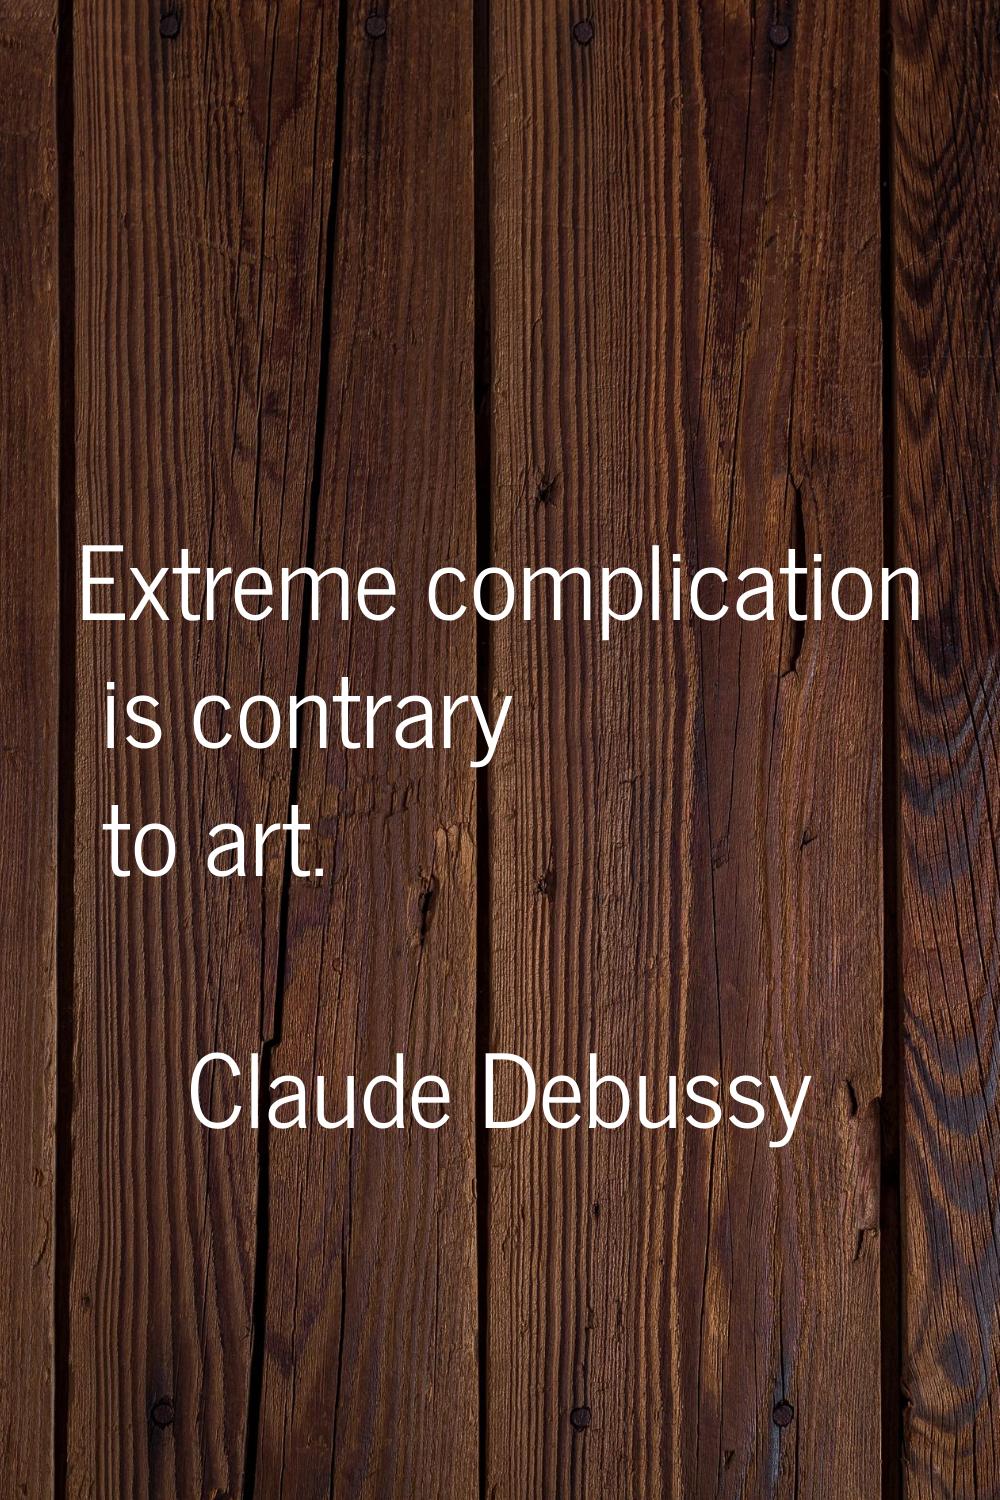 Extreme complication is contrary to art.